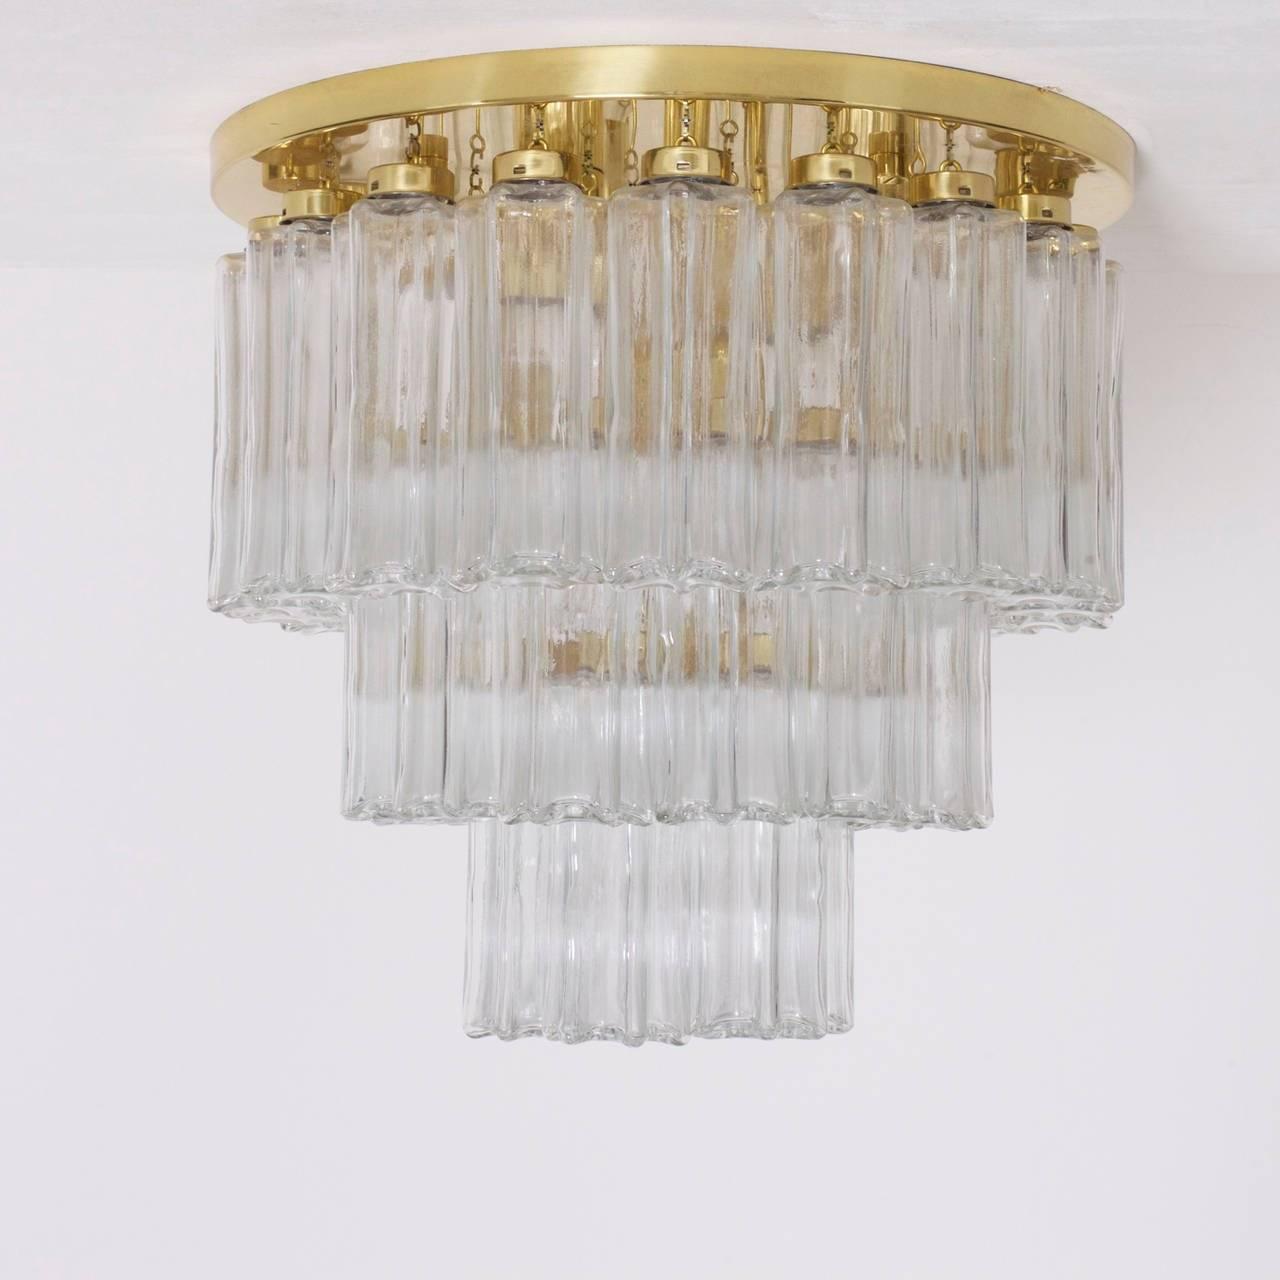 A pair of high quality Limburg chandeliers. This pieces are an example of Limburg's Modernist re-interpreted of the Art Deco tiered chandelier. 

The chandelier consists of a brass plate with 36 hanging clear glass shades arranged in a circular